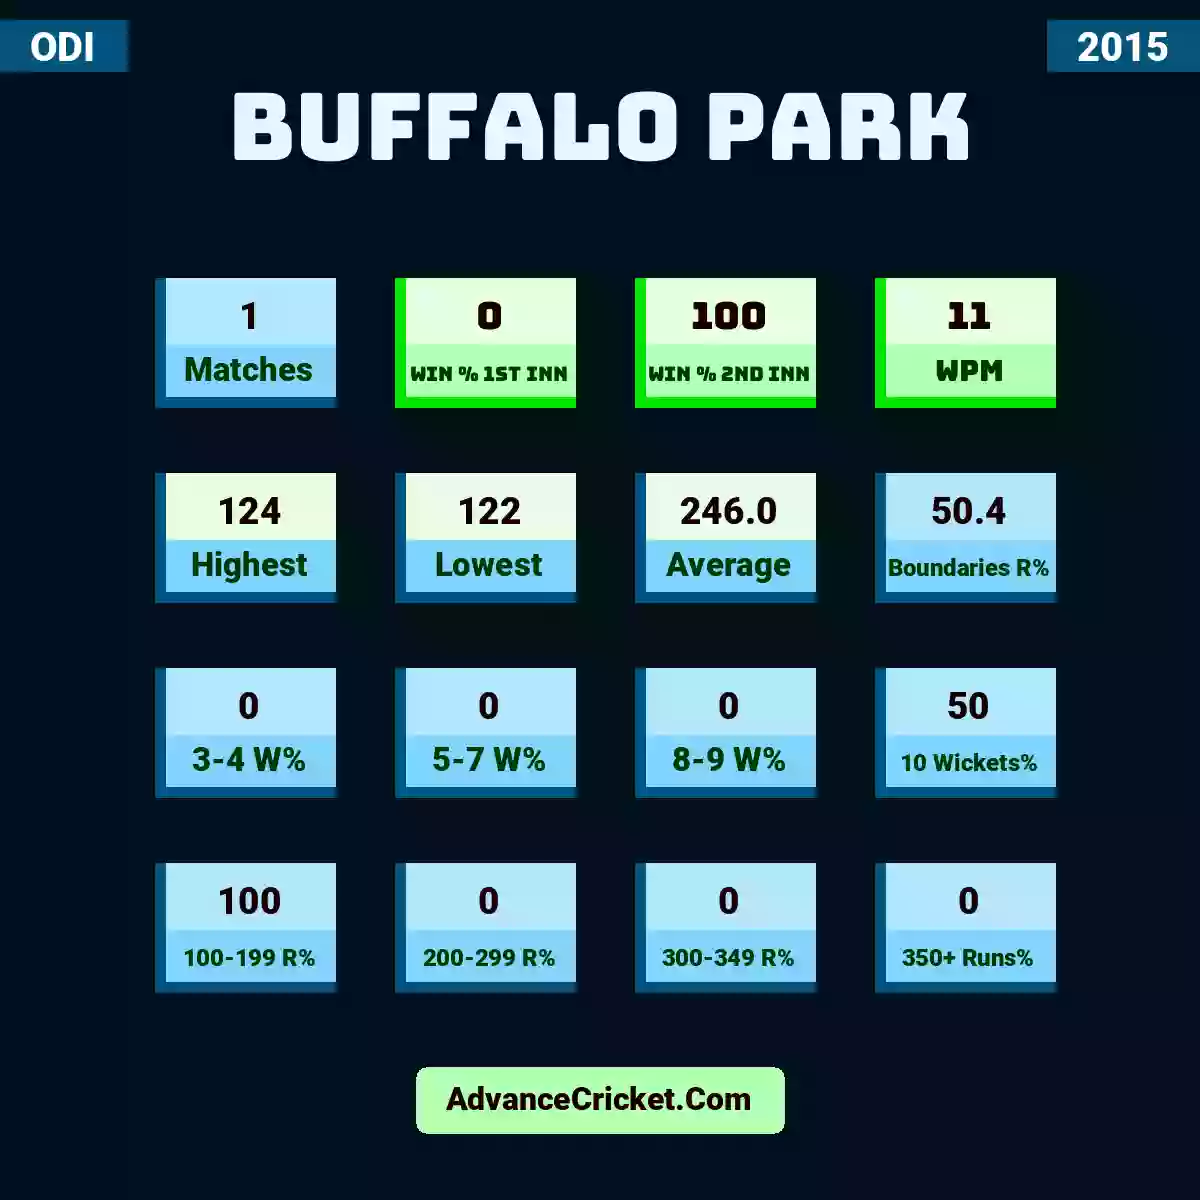 Image showing Buffalo Park with Matches: 1, Win % 1st Inn: 0, Win % 2nd Inn: 100, WPM: 11, Highest: 124, Lowest: 122, Average: 246.0, Boundaries R%: 50.4, 3-4 W%: 0, 5-7 W%: 0, 8-9 W%: 0, 10 Wickets%: 50, 100-199 R%: 100, 200-299 R%: 0, 300-349 R%: 0, 350+ Runs%: 0.